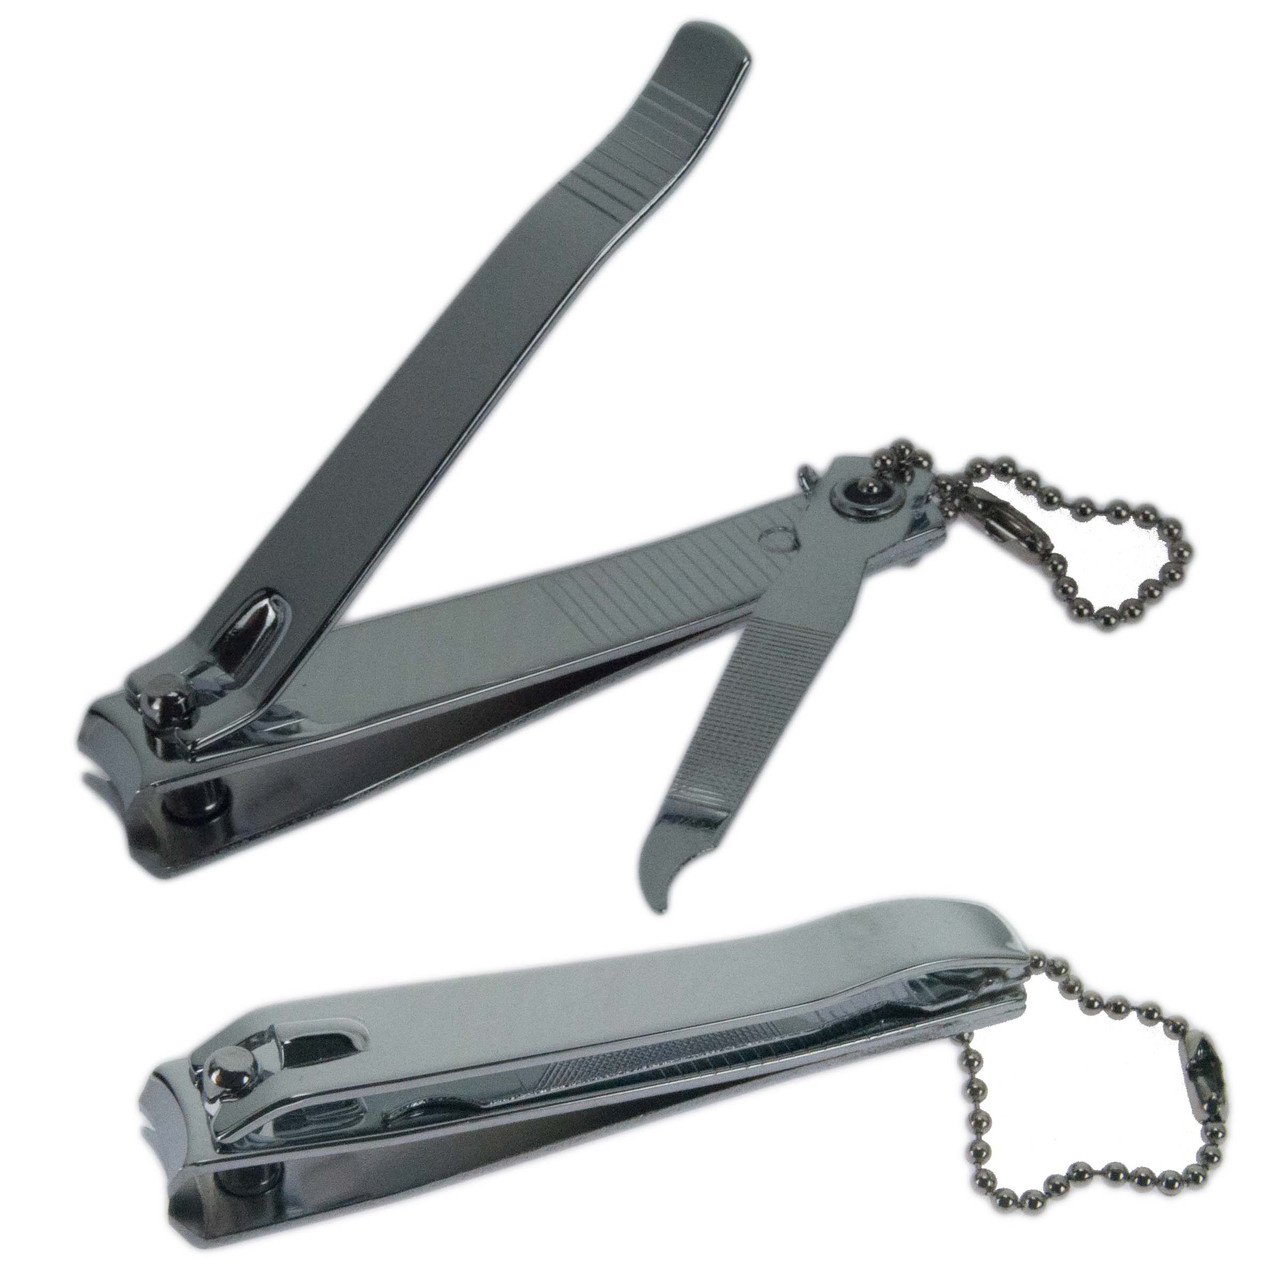 Shop for and Buy Toe Nail Clipper Keychain at . Large